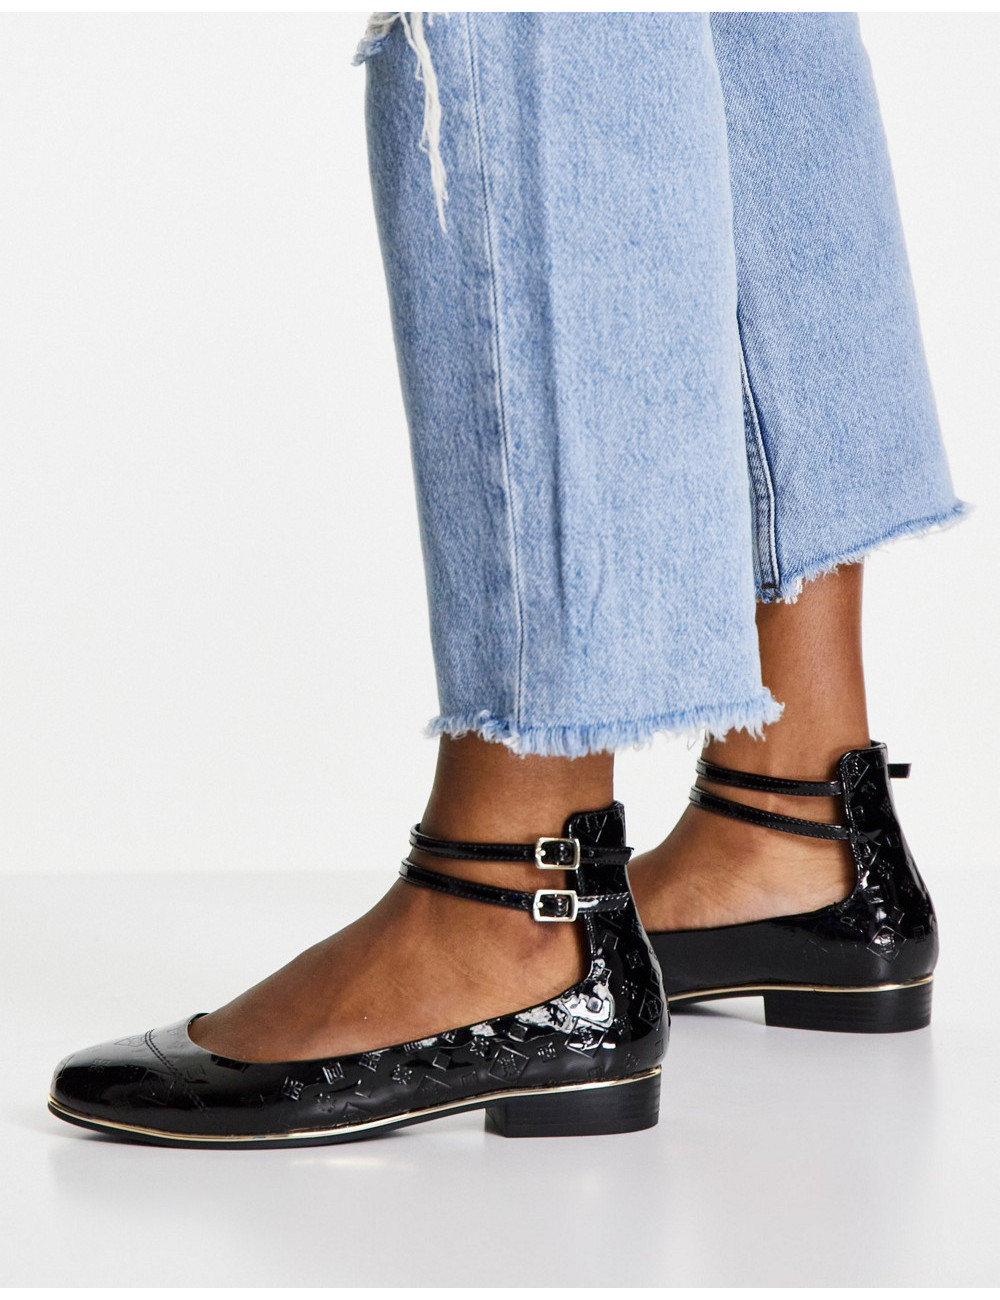 River Island ankle strap...